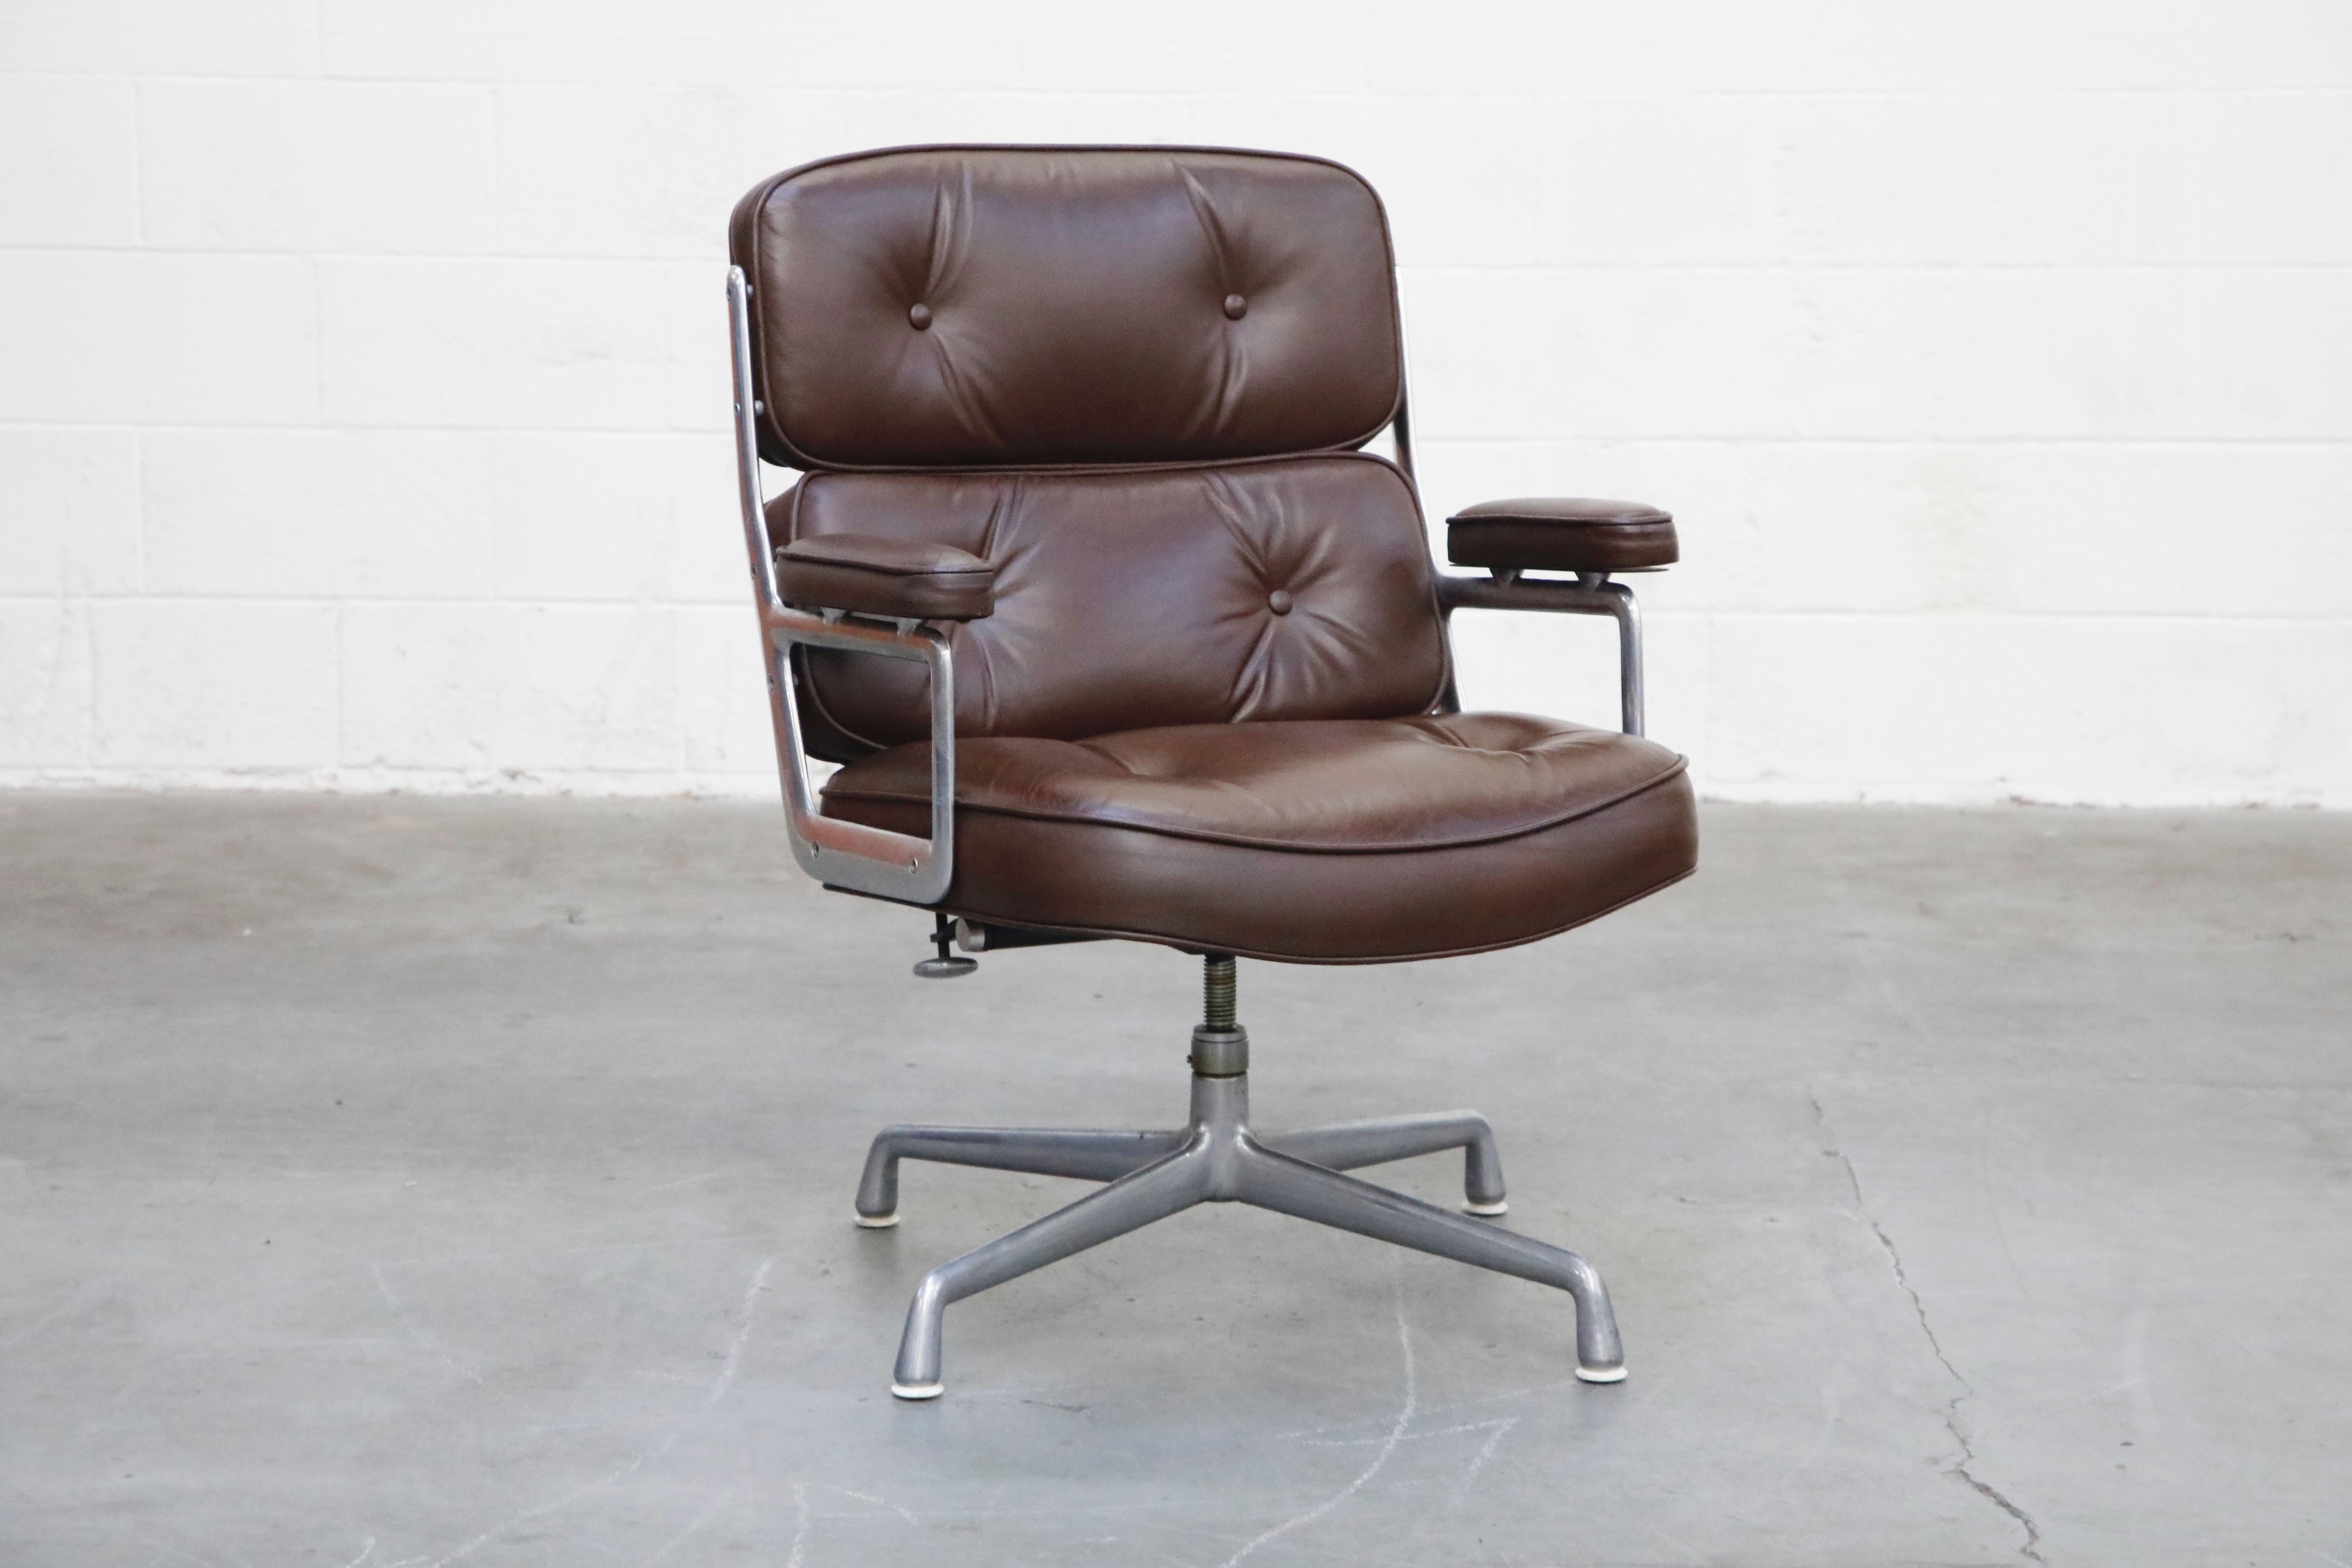 Mid-Century Modern Pair of Time Life Lounge Chairs by Charles Eames for Herman Miller, 1977, Signed